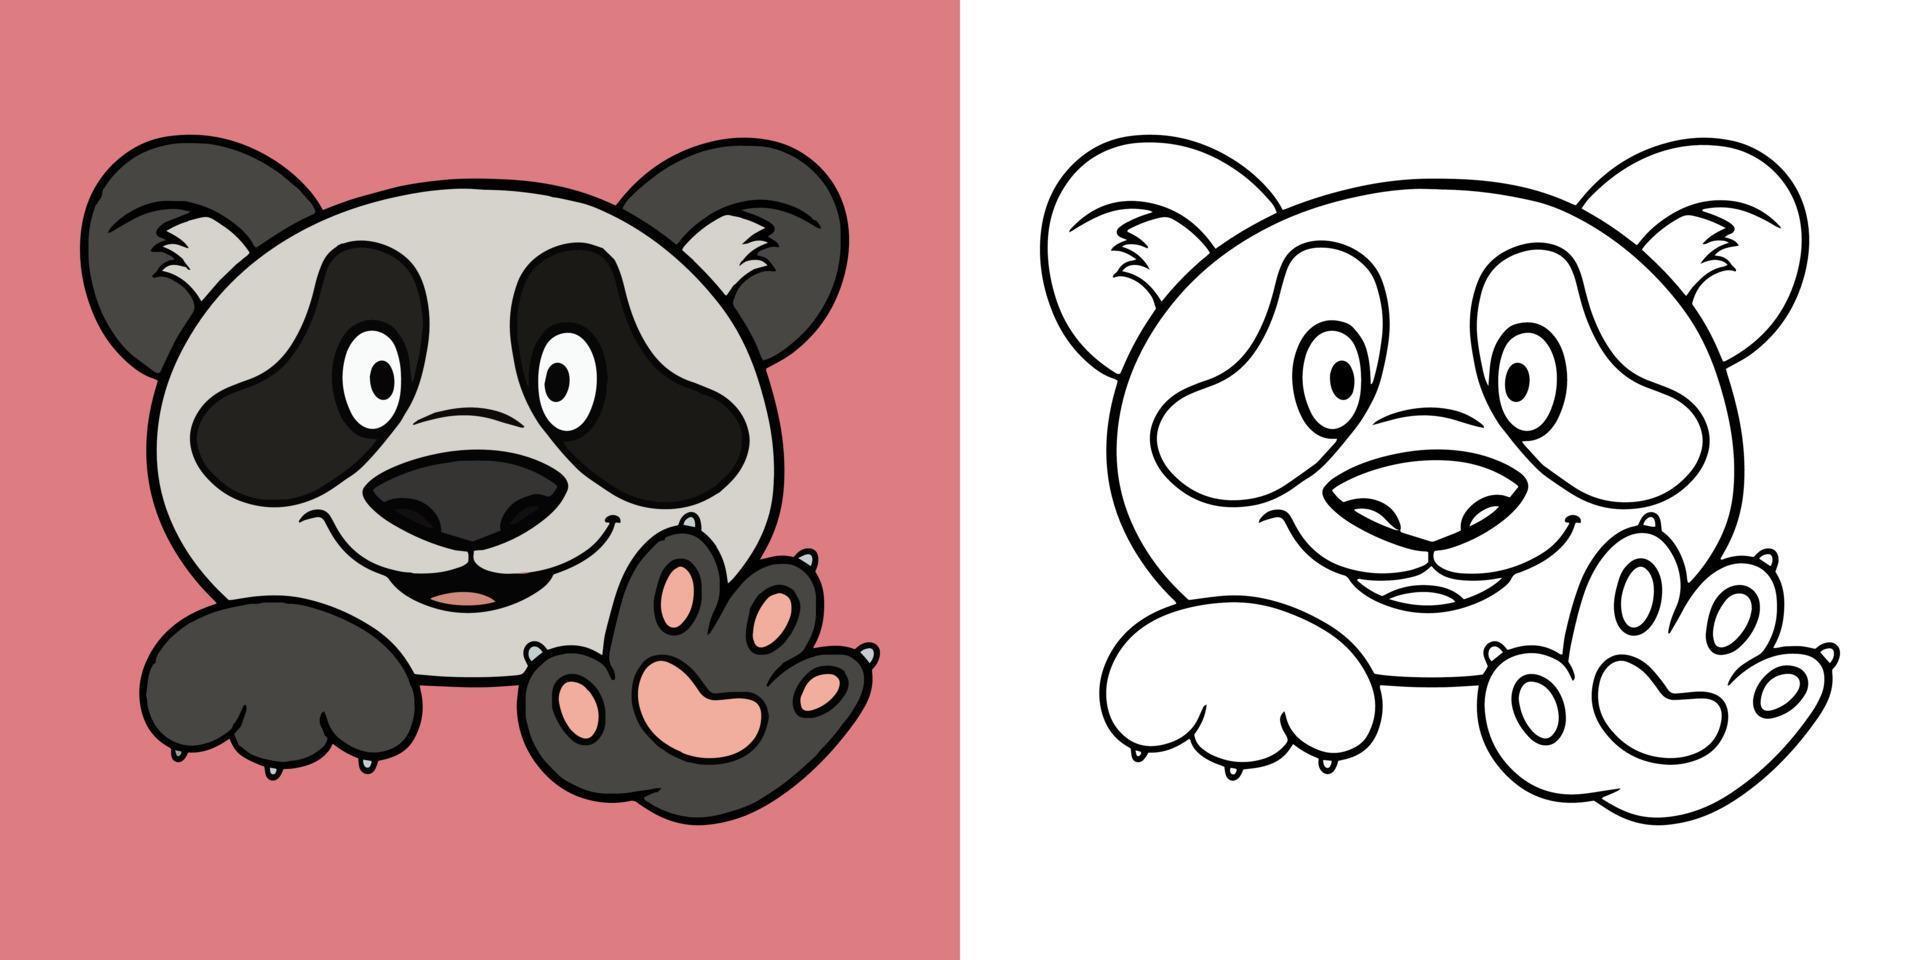 Horizontal illustration for coloring books, Cute little panda smiles, Cute fluffy pandas in cartoon style, vector illustration